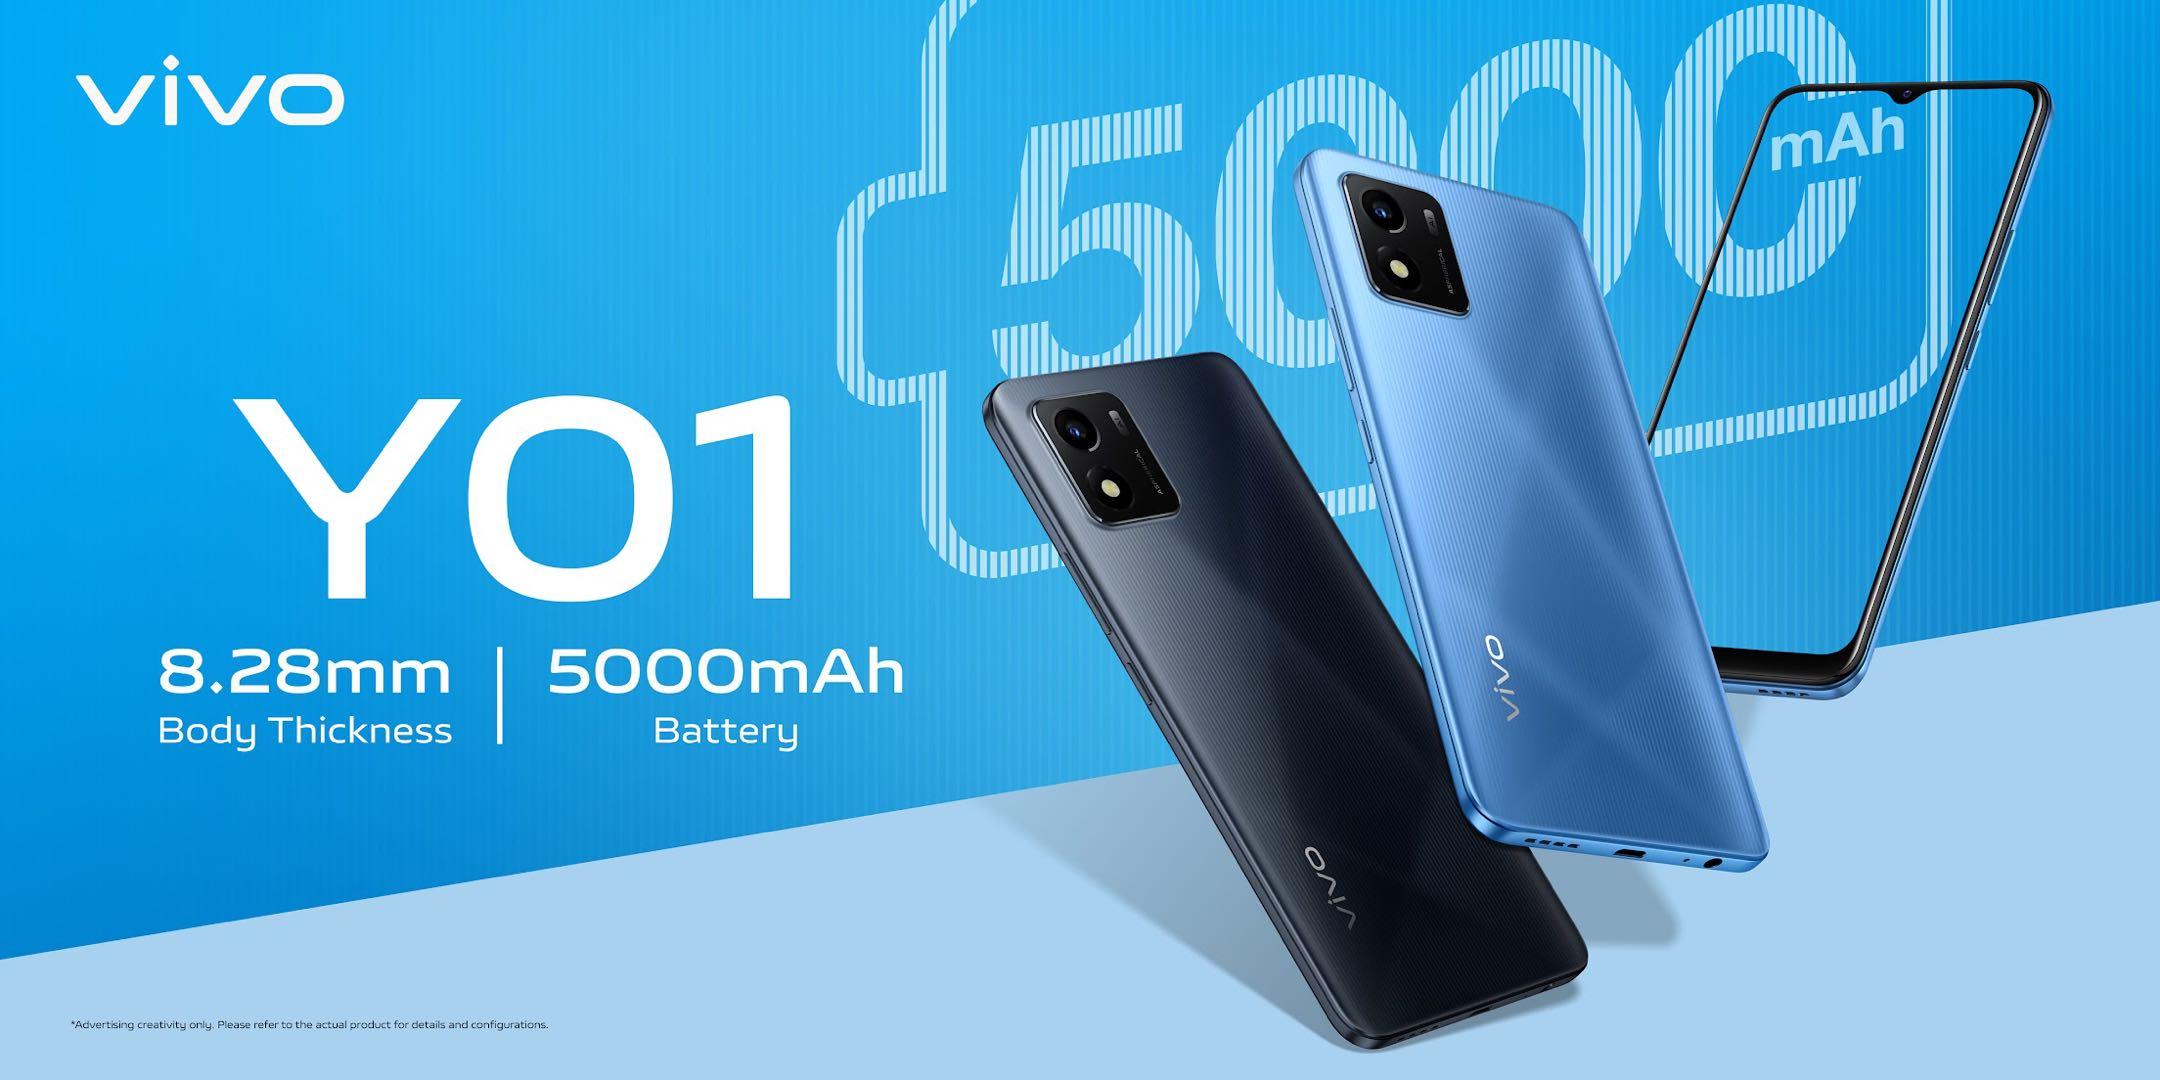 vivo Y01 Launchedin Pakistan — Featuring 5000mAh Battery and Trendy Design